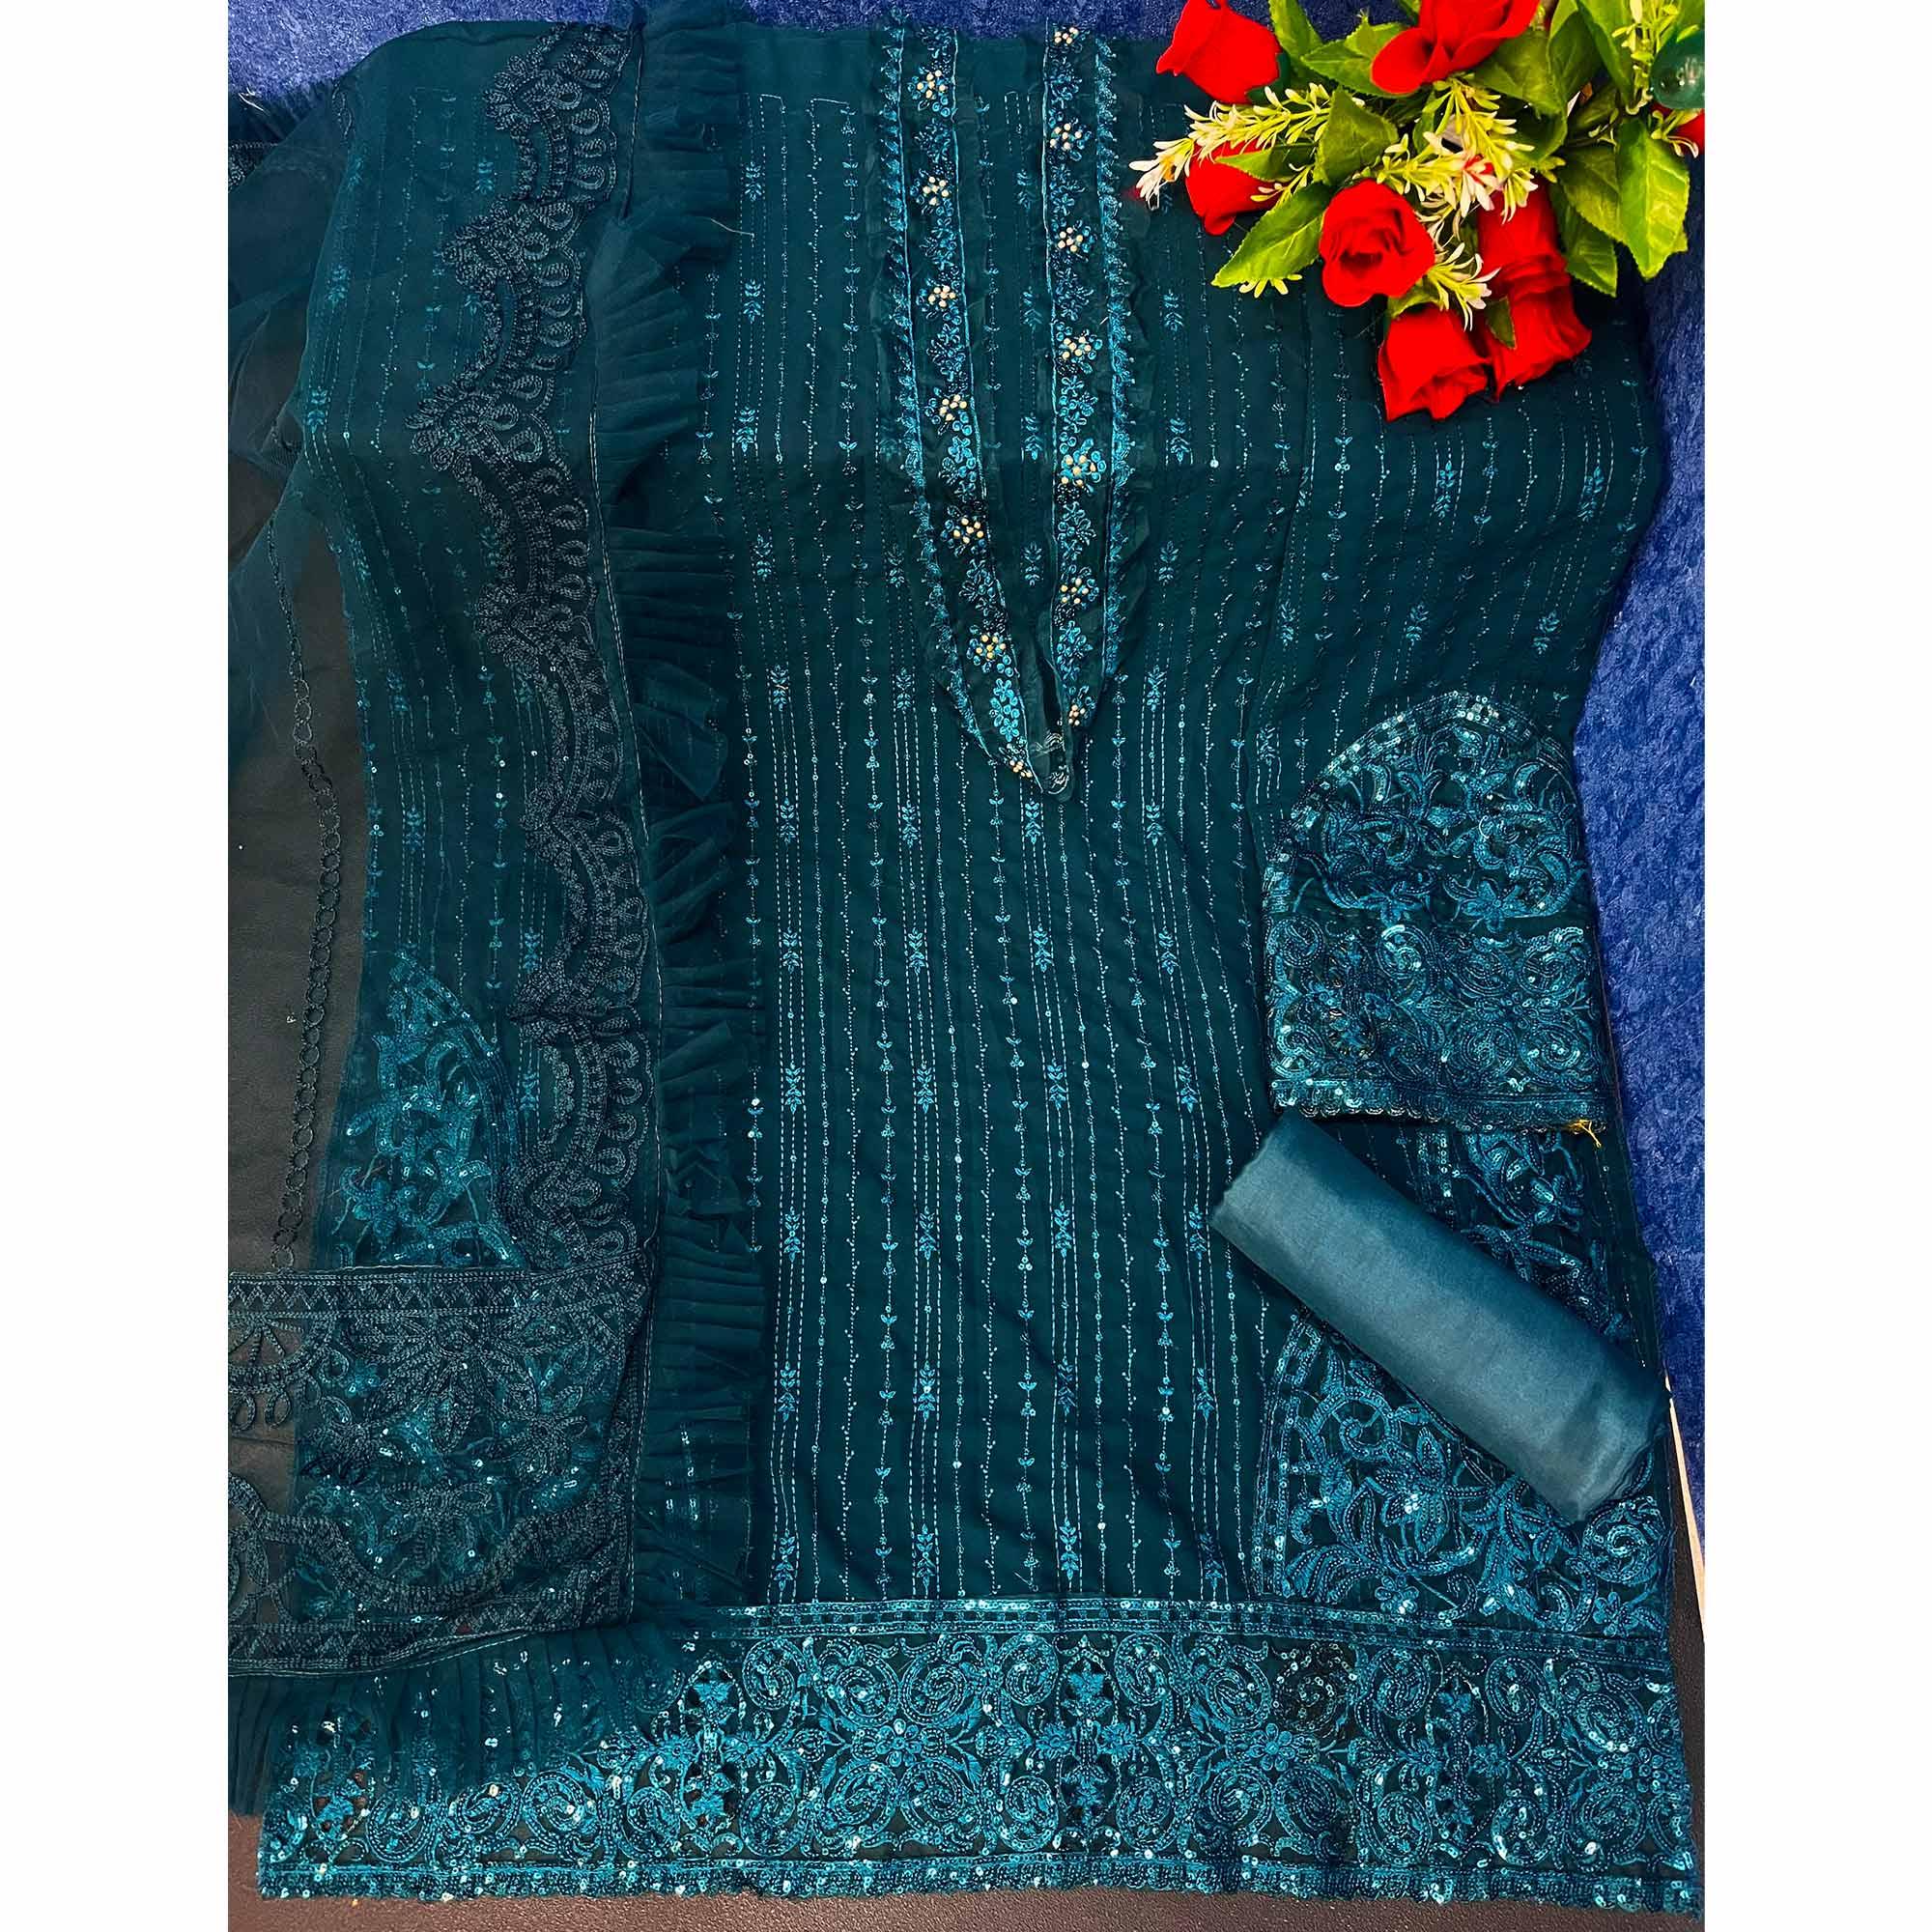 Blue Embellished With Embroidered Georgette Pakistani Suit - Peachmode